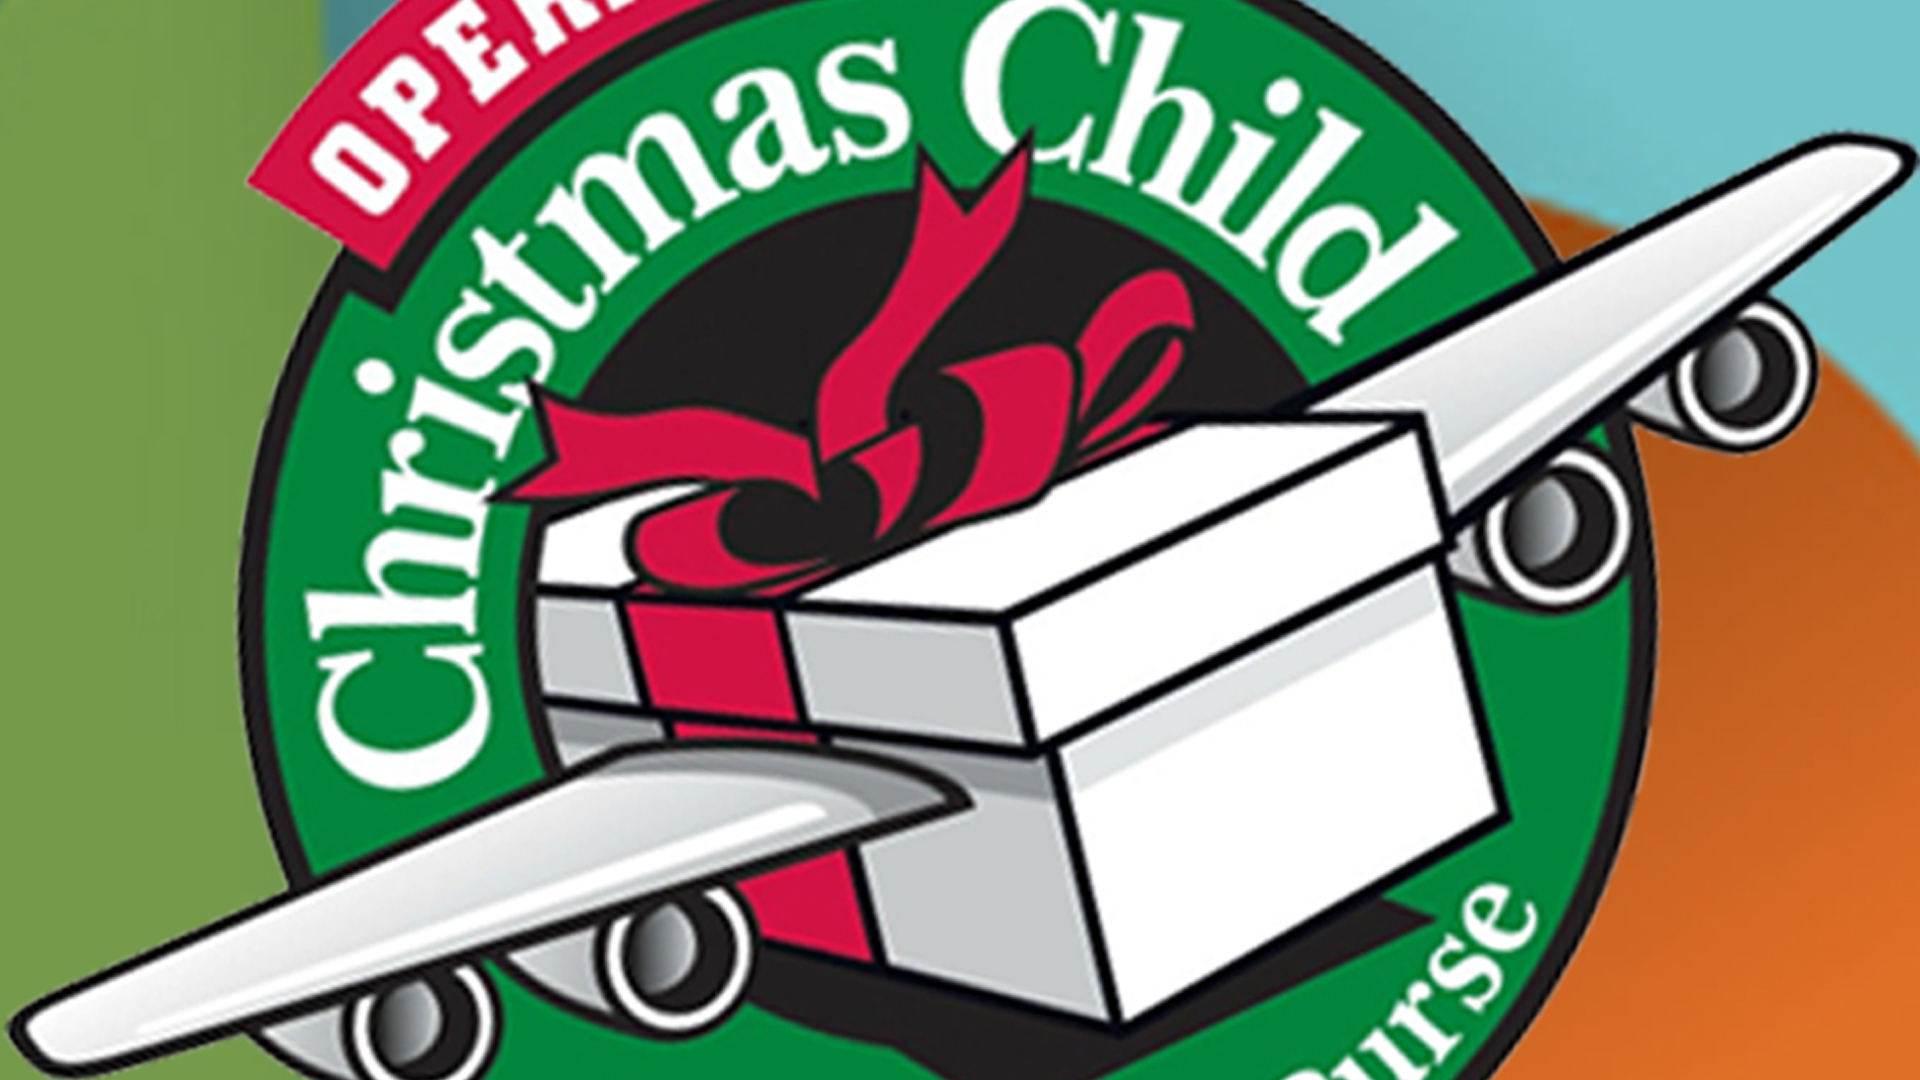 free clipart operation christmas child - photo #14